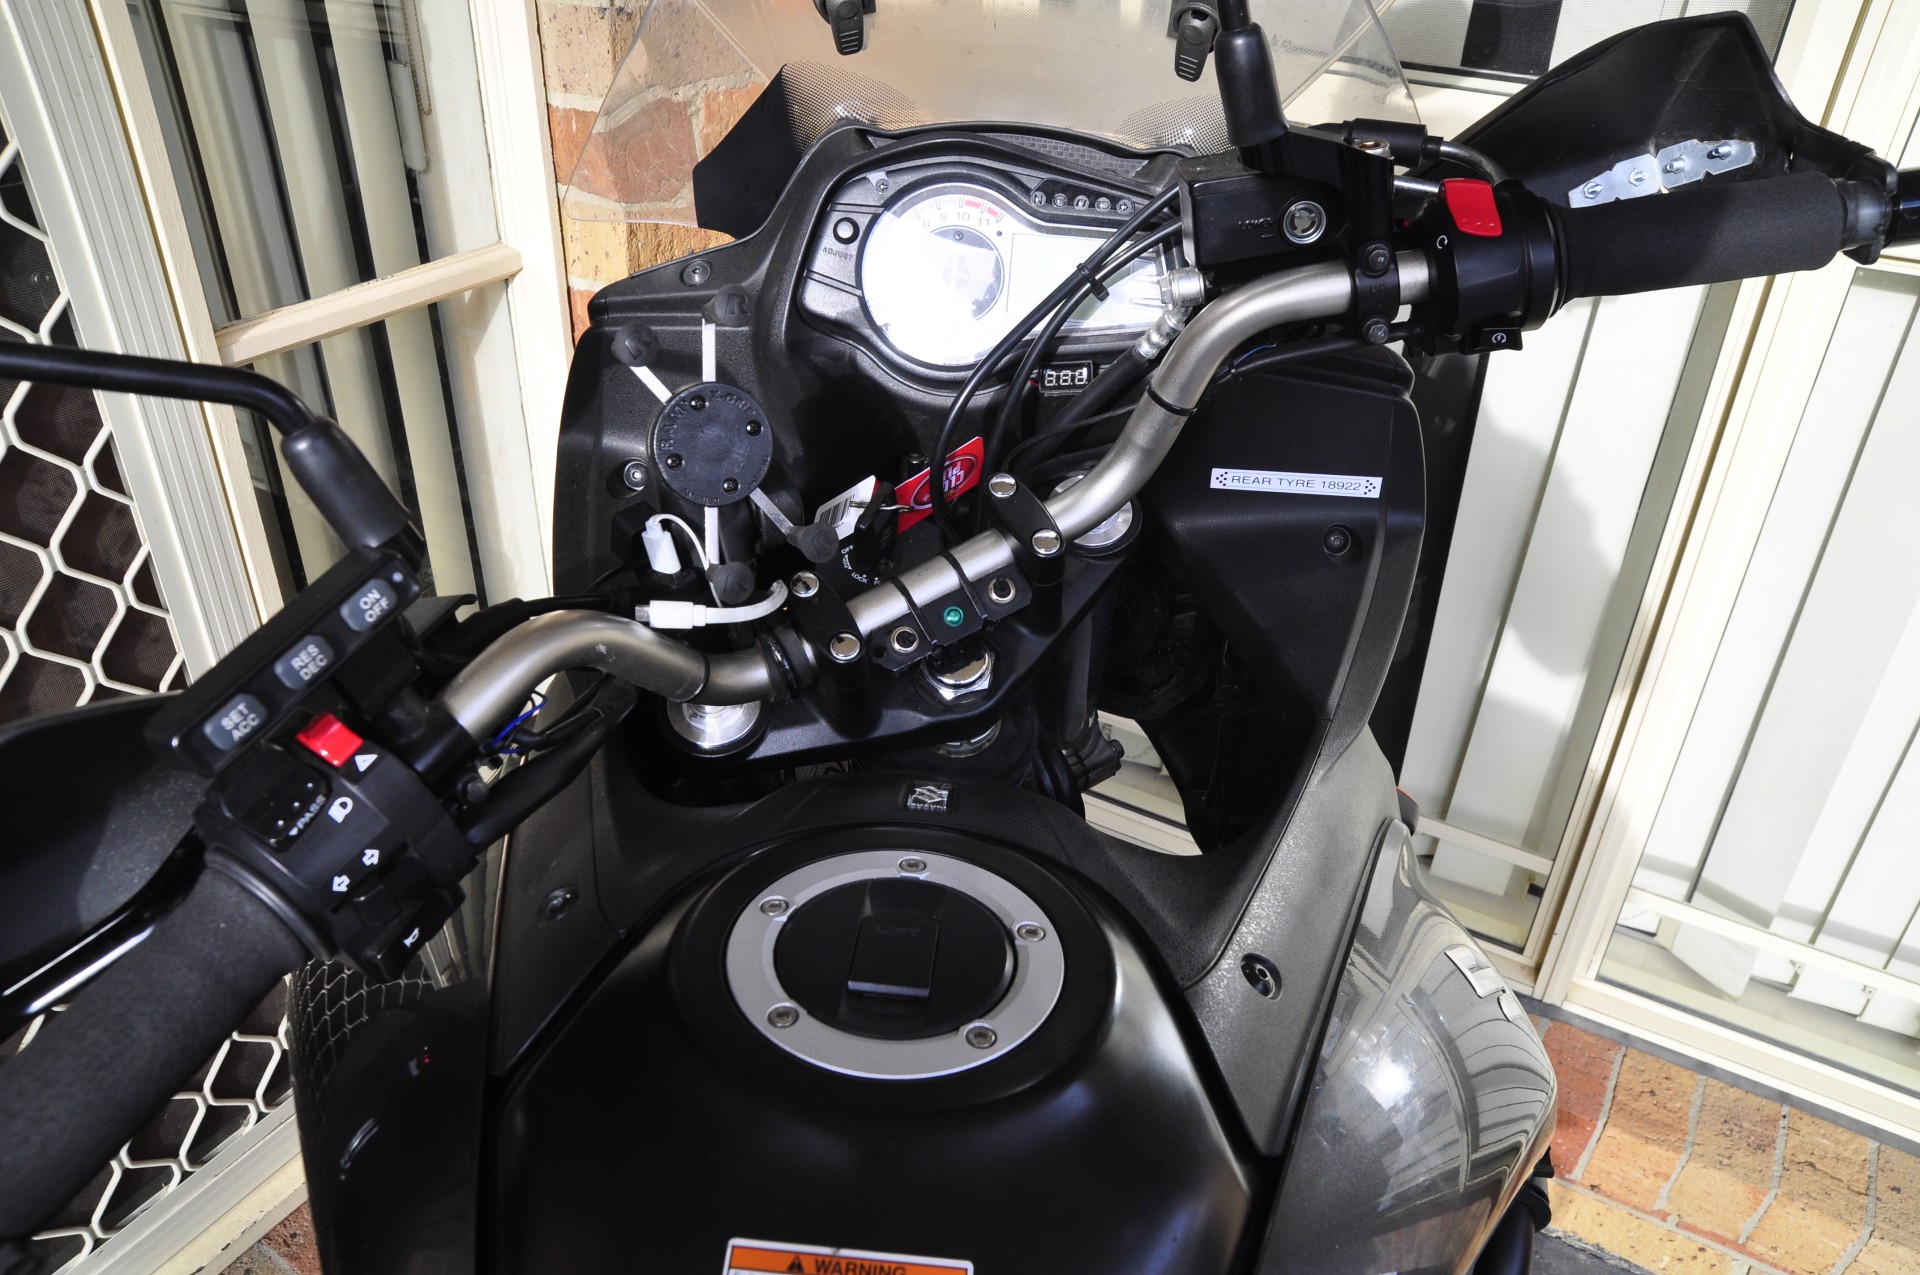 DIY: ABS motorcycle switch - with relay (VAR II) - V-Strom 650DL